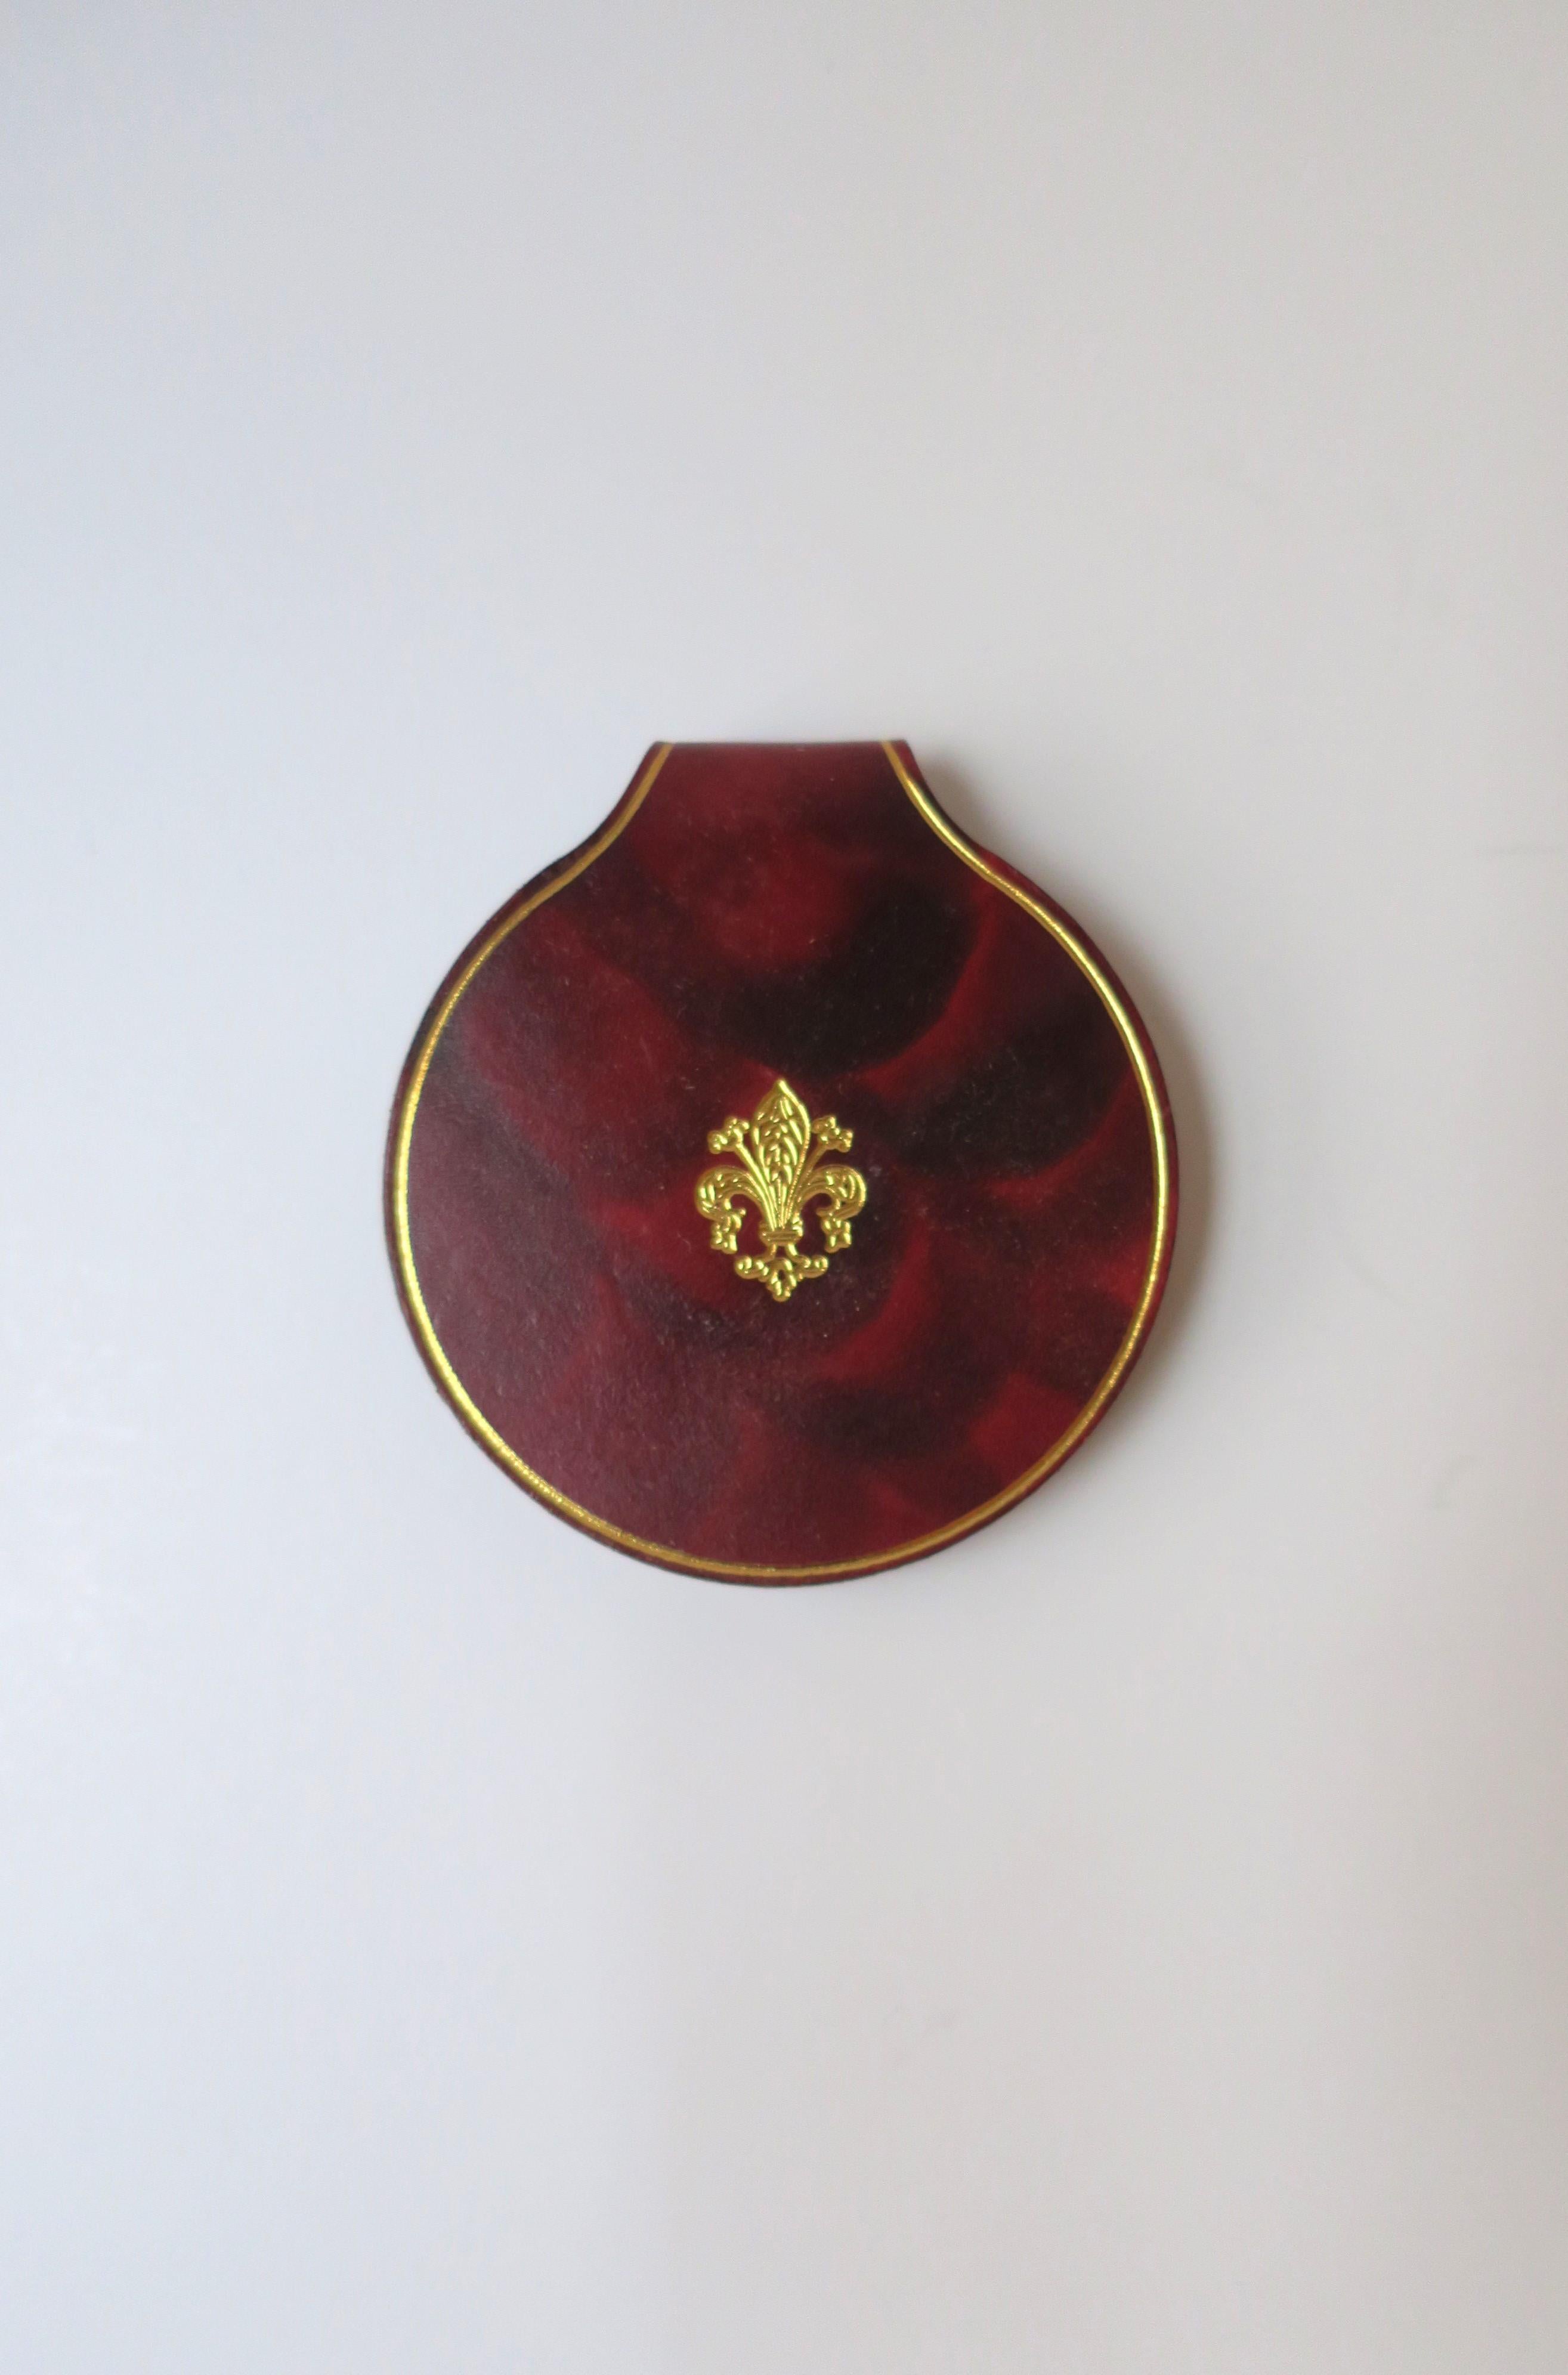 A beautiful Italian leather compact mirror with gold embossing, circa 20th century, Italy. This compact mirror is all leather in a red burgundy hue with gold embossing around edge, front center with fleur-de-lis design, inside around edge, and on